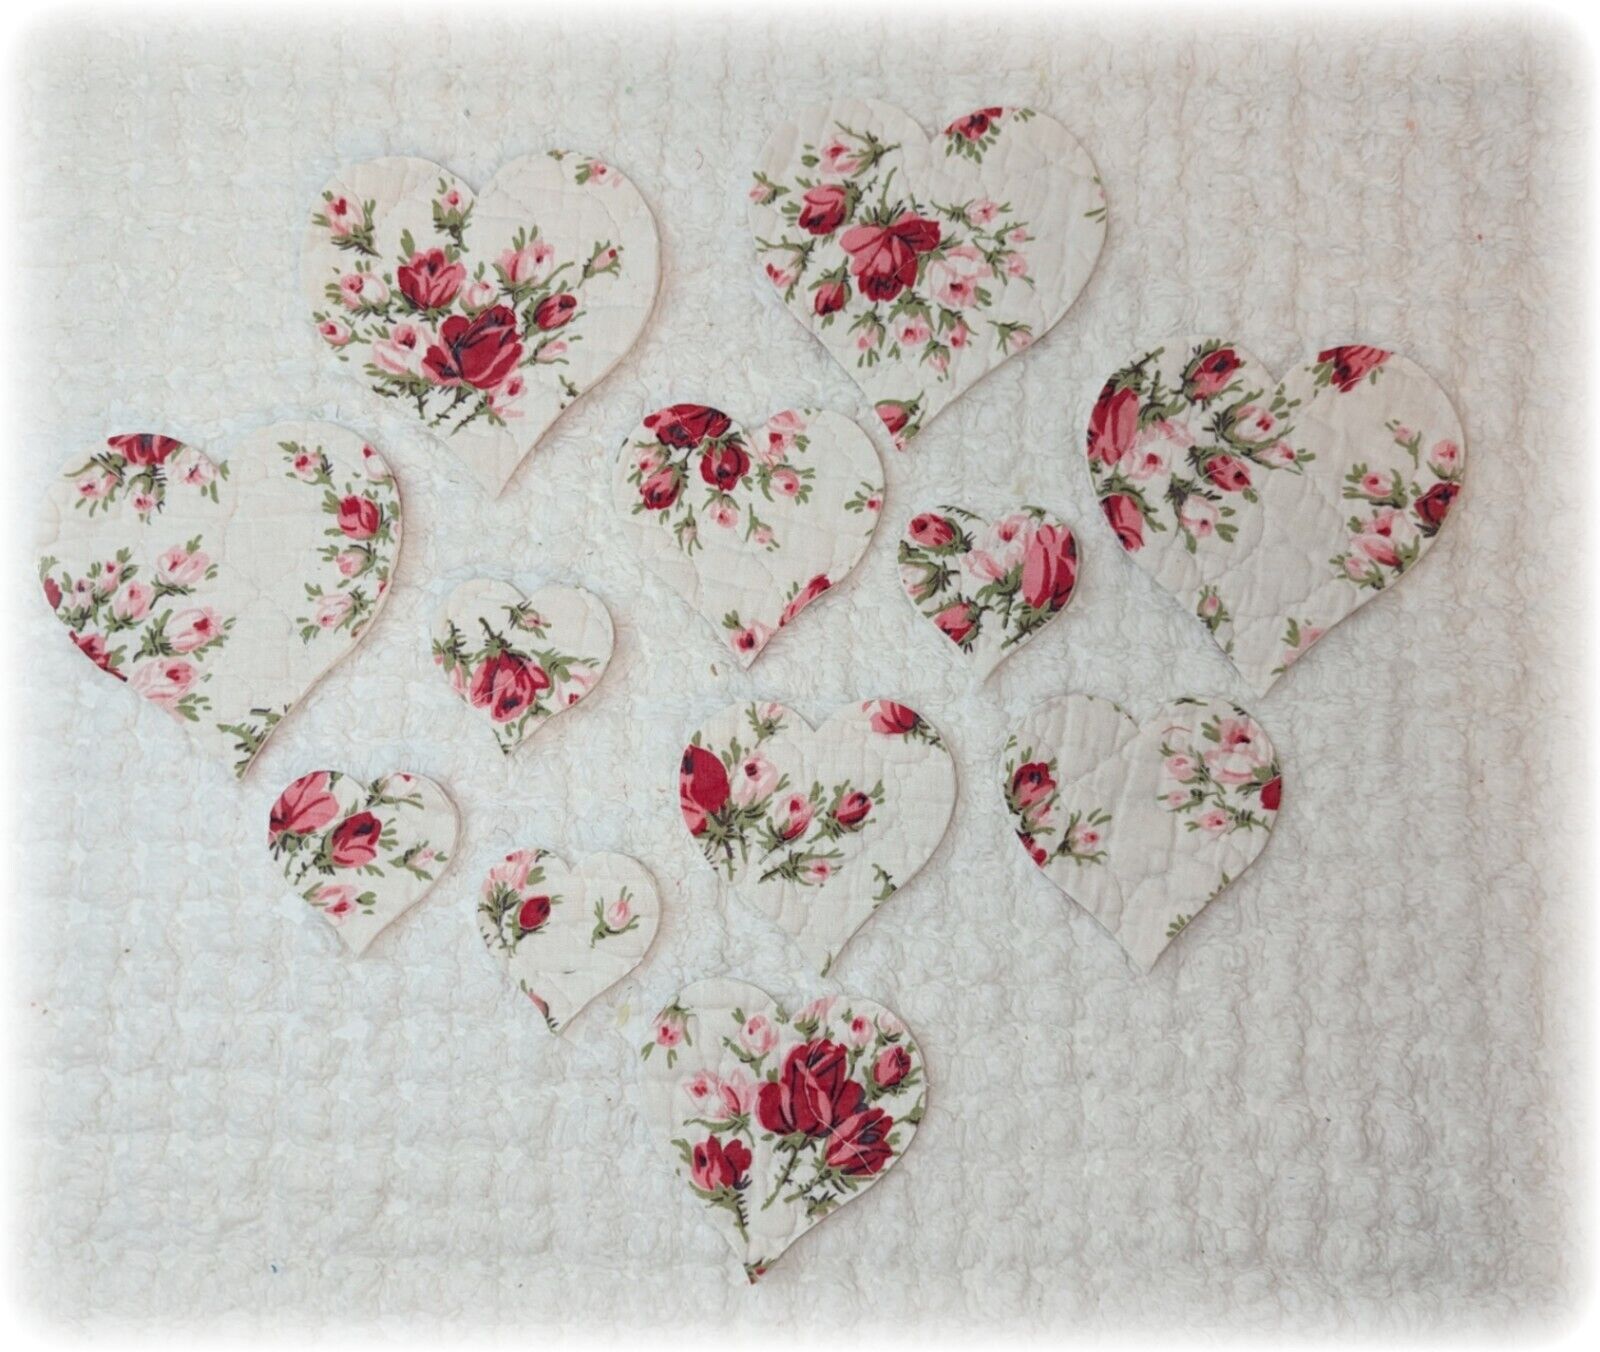 Vintage Roses Cutter Quilt FeedSack Applique Die Cuts 1950 Blanket Heart Cut Out Whole Cloth Quilt